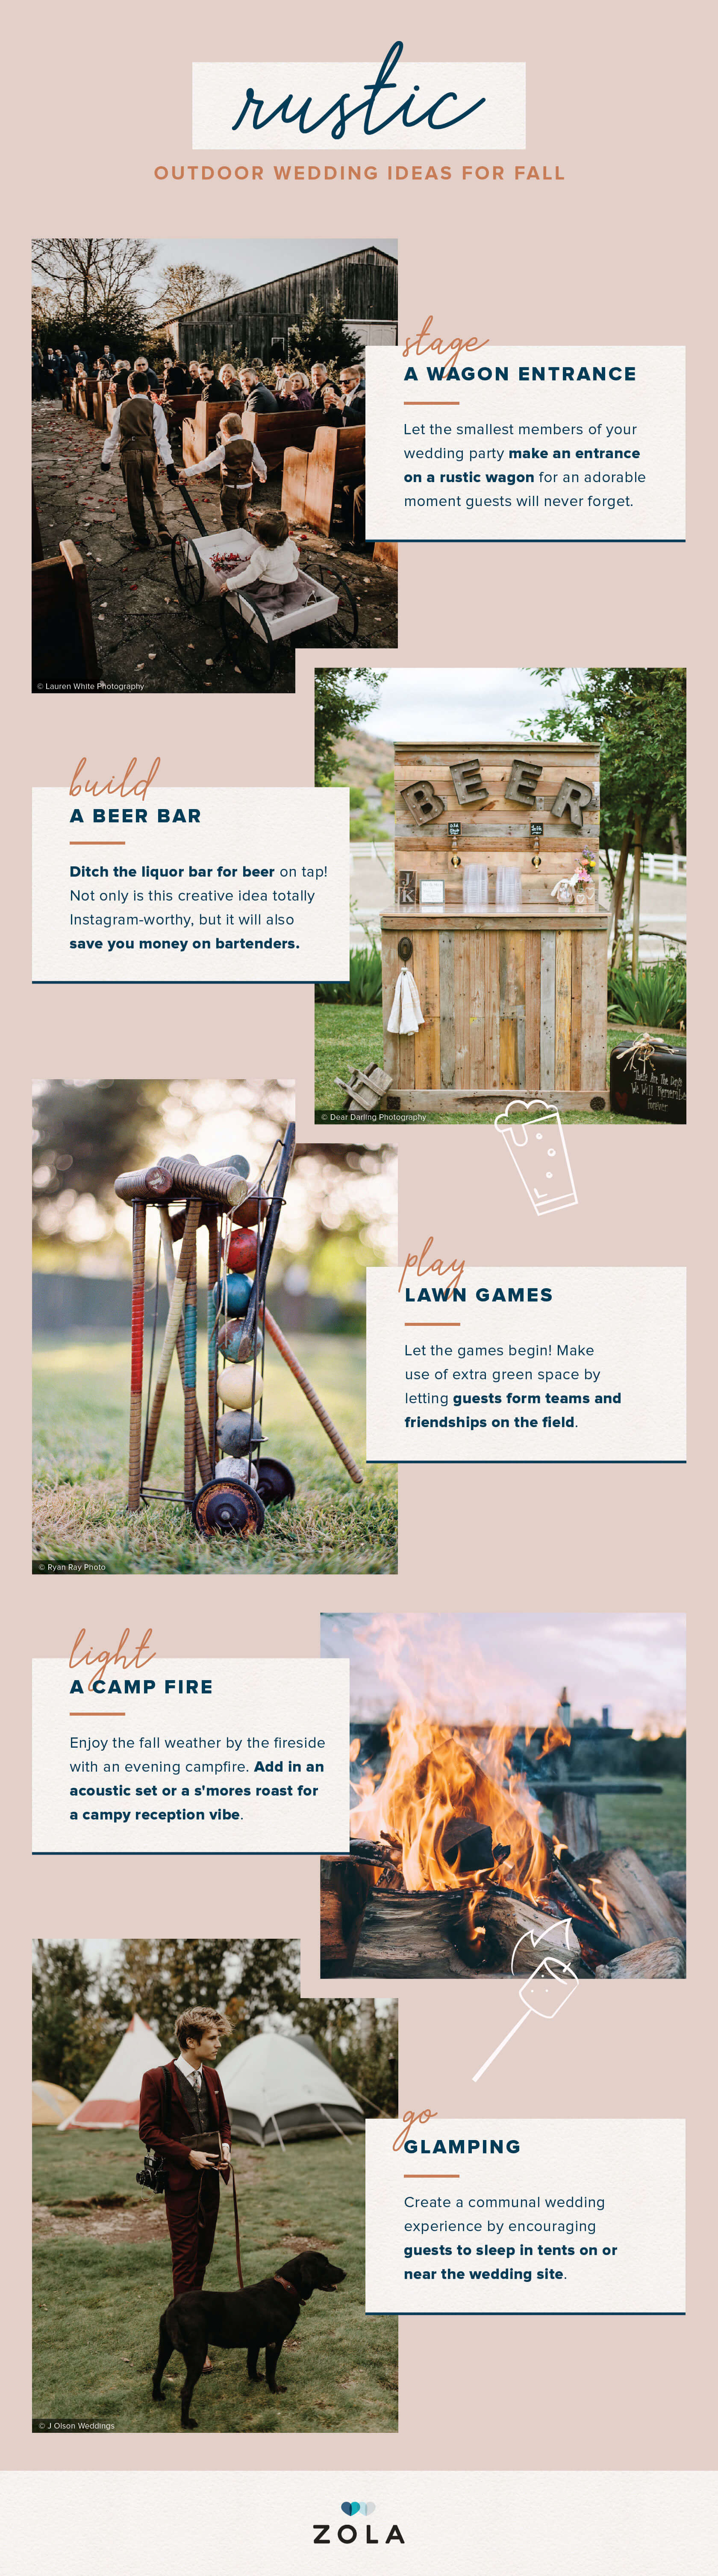 Outdoor-Wedding-ideas-for-fall-rustic